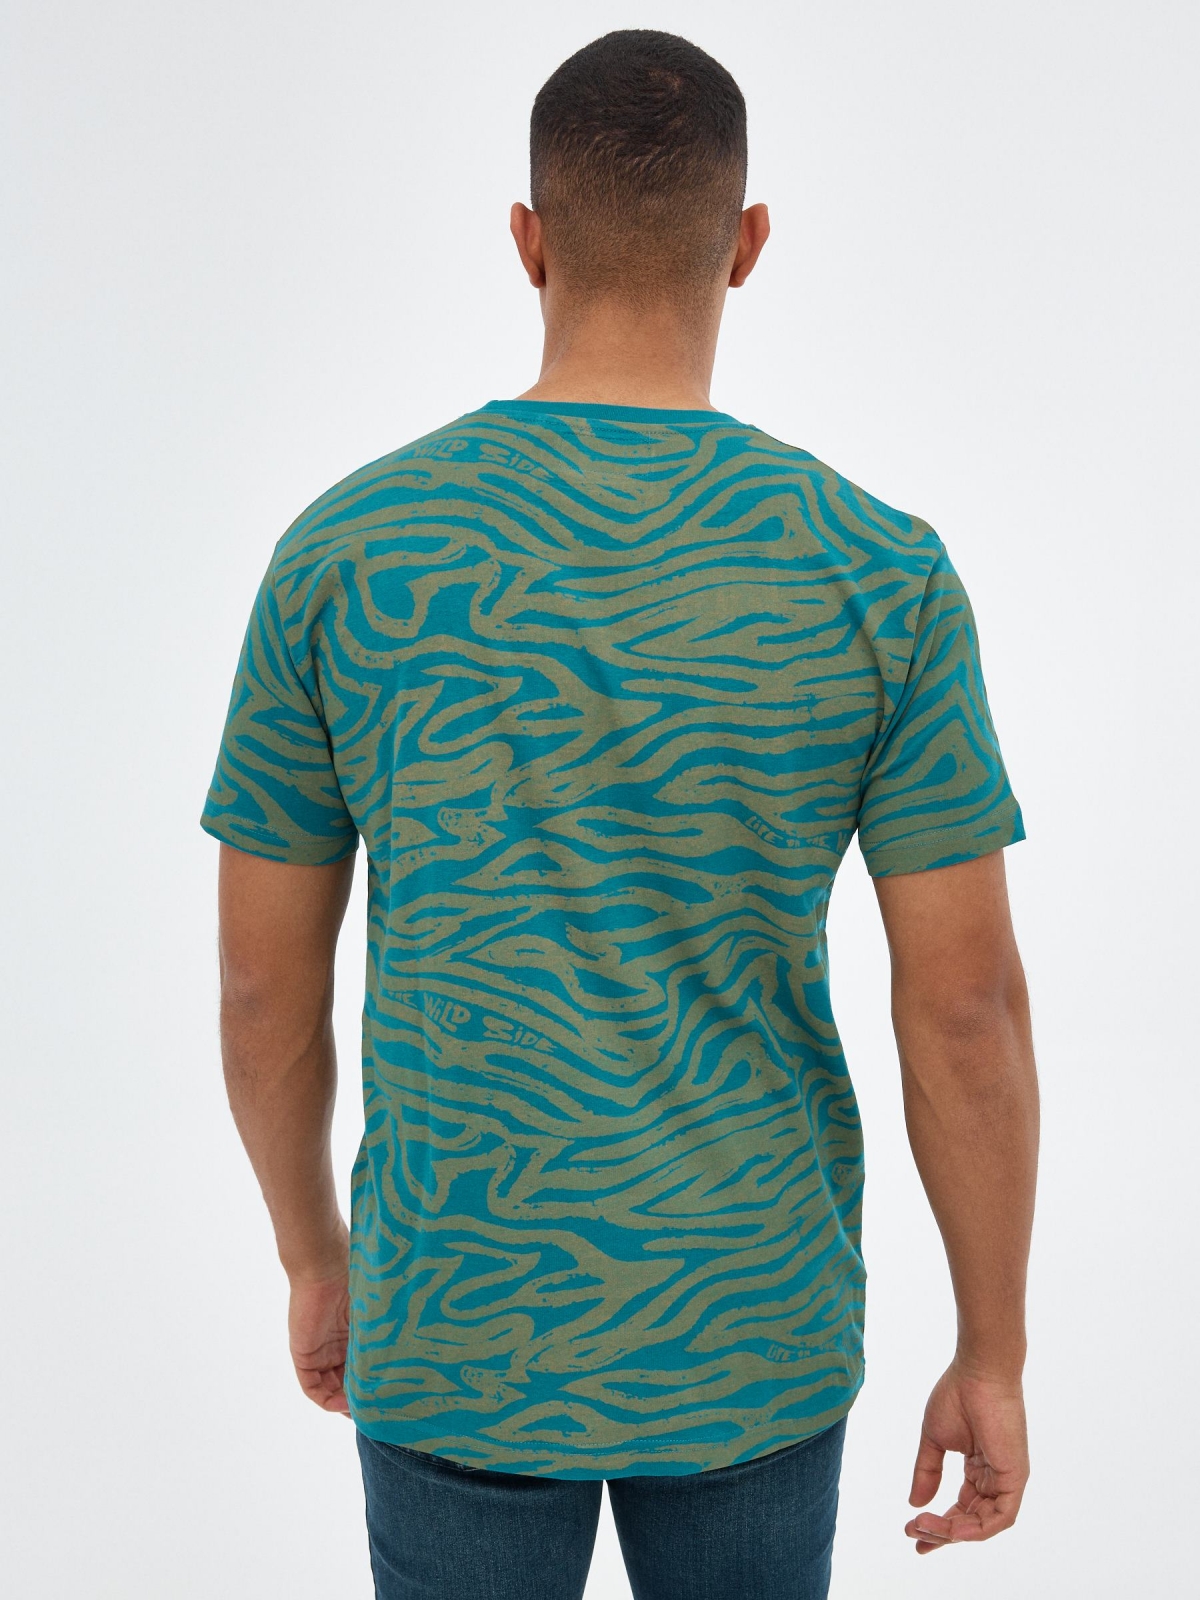 Graphic print t-shirt emerald middle back view